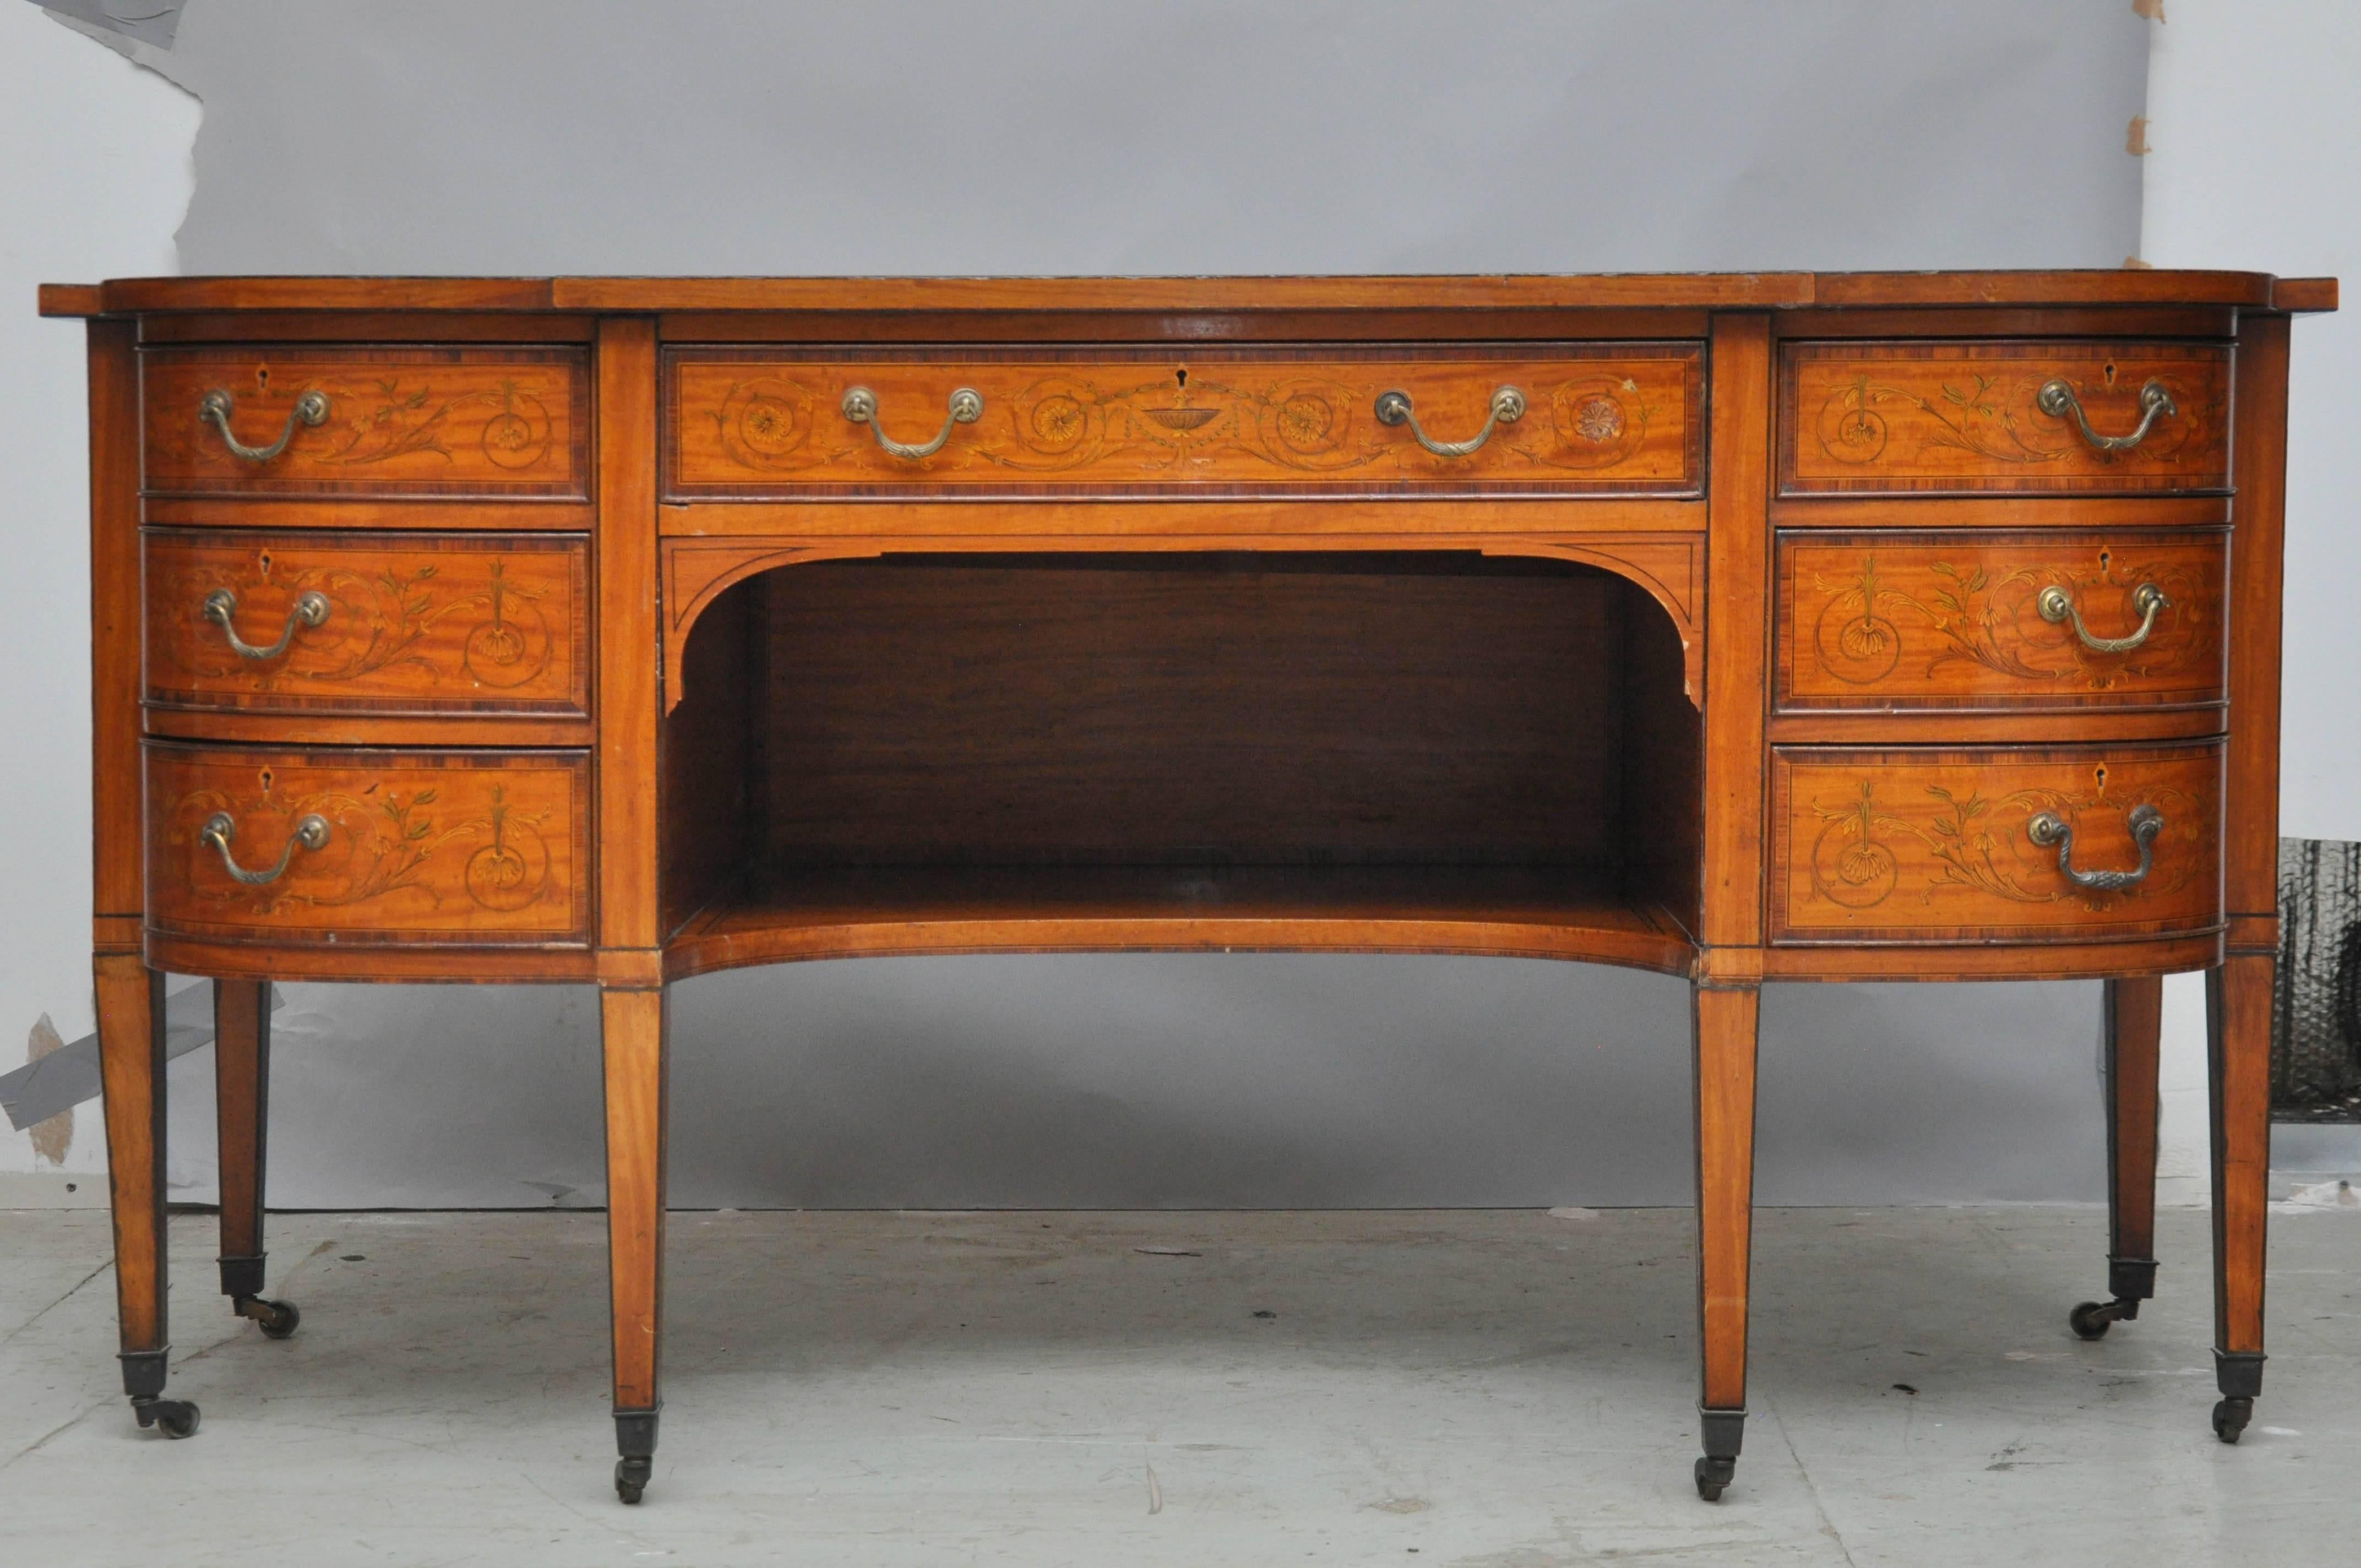 Edwardian period Sheraton revival inlaid satinwood desk with leather writing surface, signature Sheraton shapely rectangular surface design with left and right front rounded corners, below the writing surface are three graduating rounded drawers on